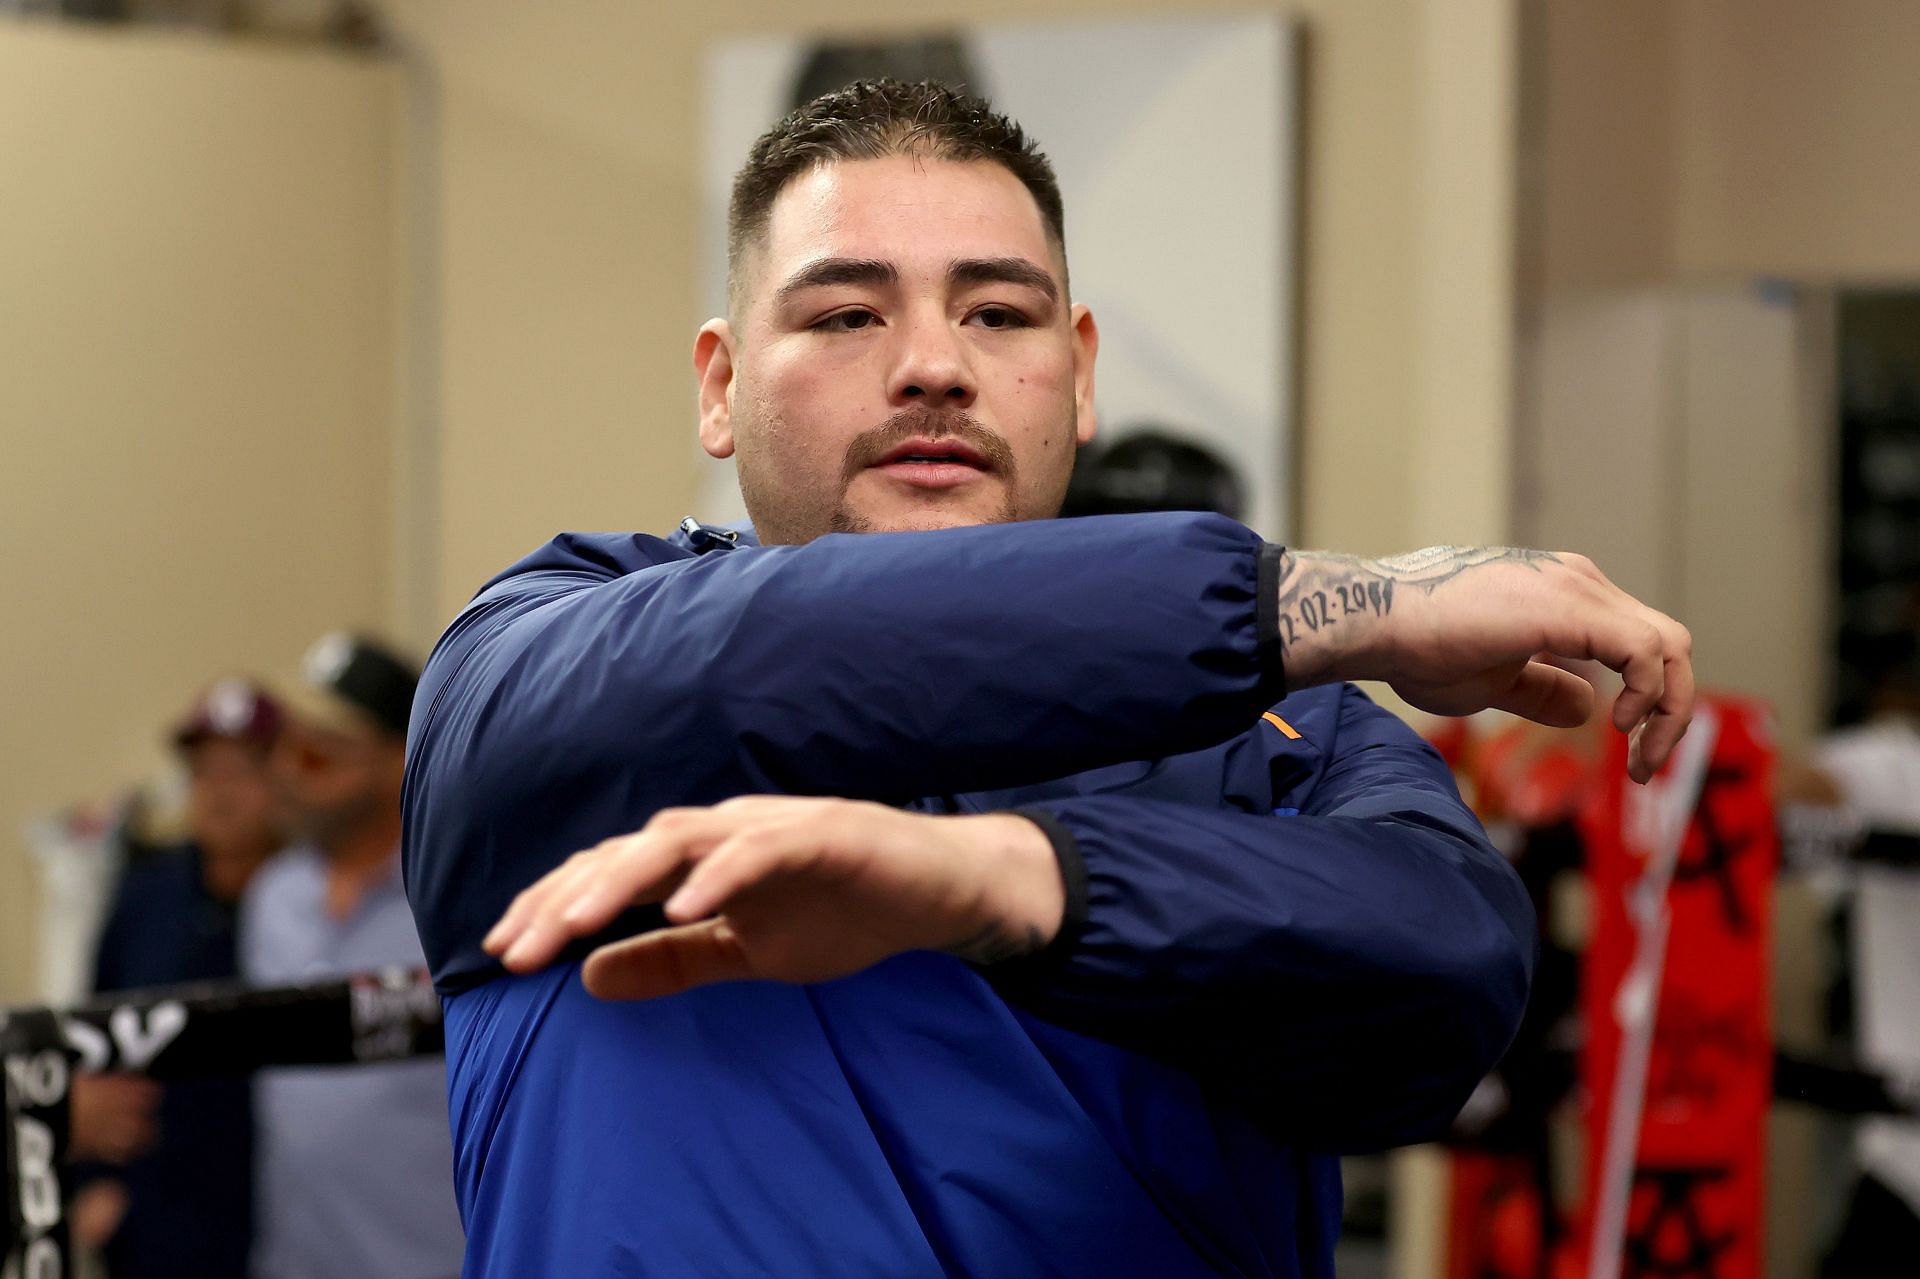 Andy Ruiz Jr. is preparing for competition this September